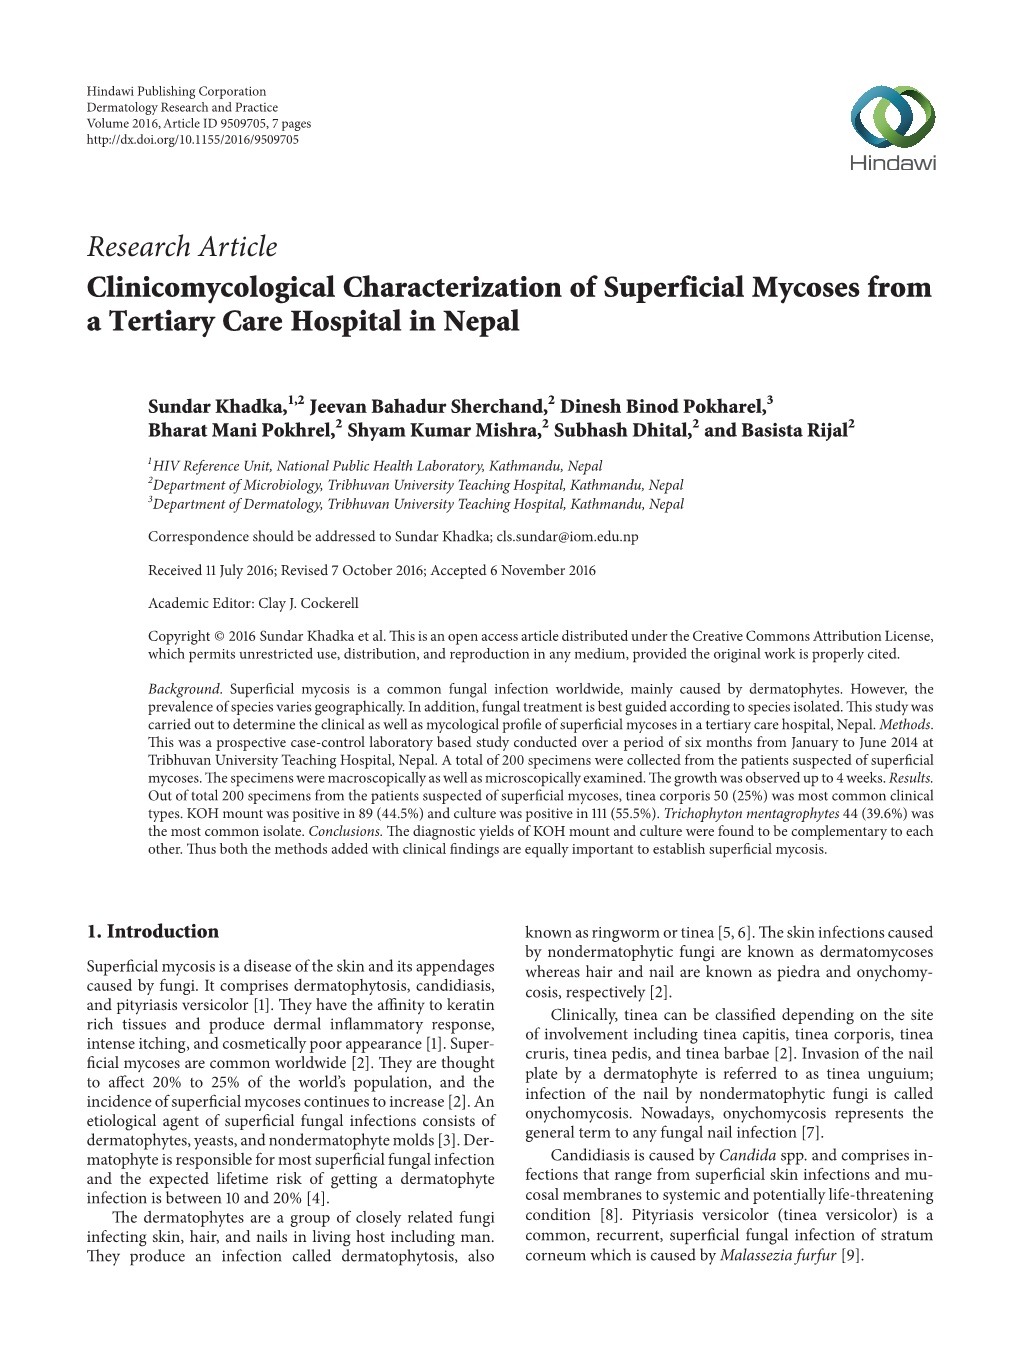 Clinicomycological Characterization of Superficial Mycoses from a Tertiary Care Hospital in Nepal